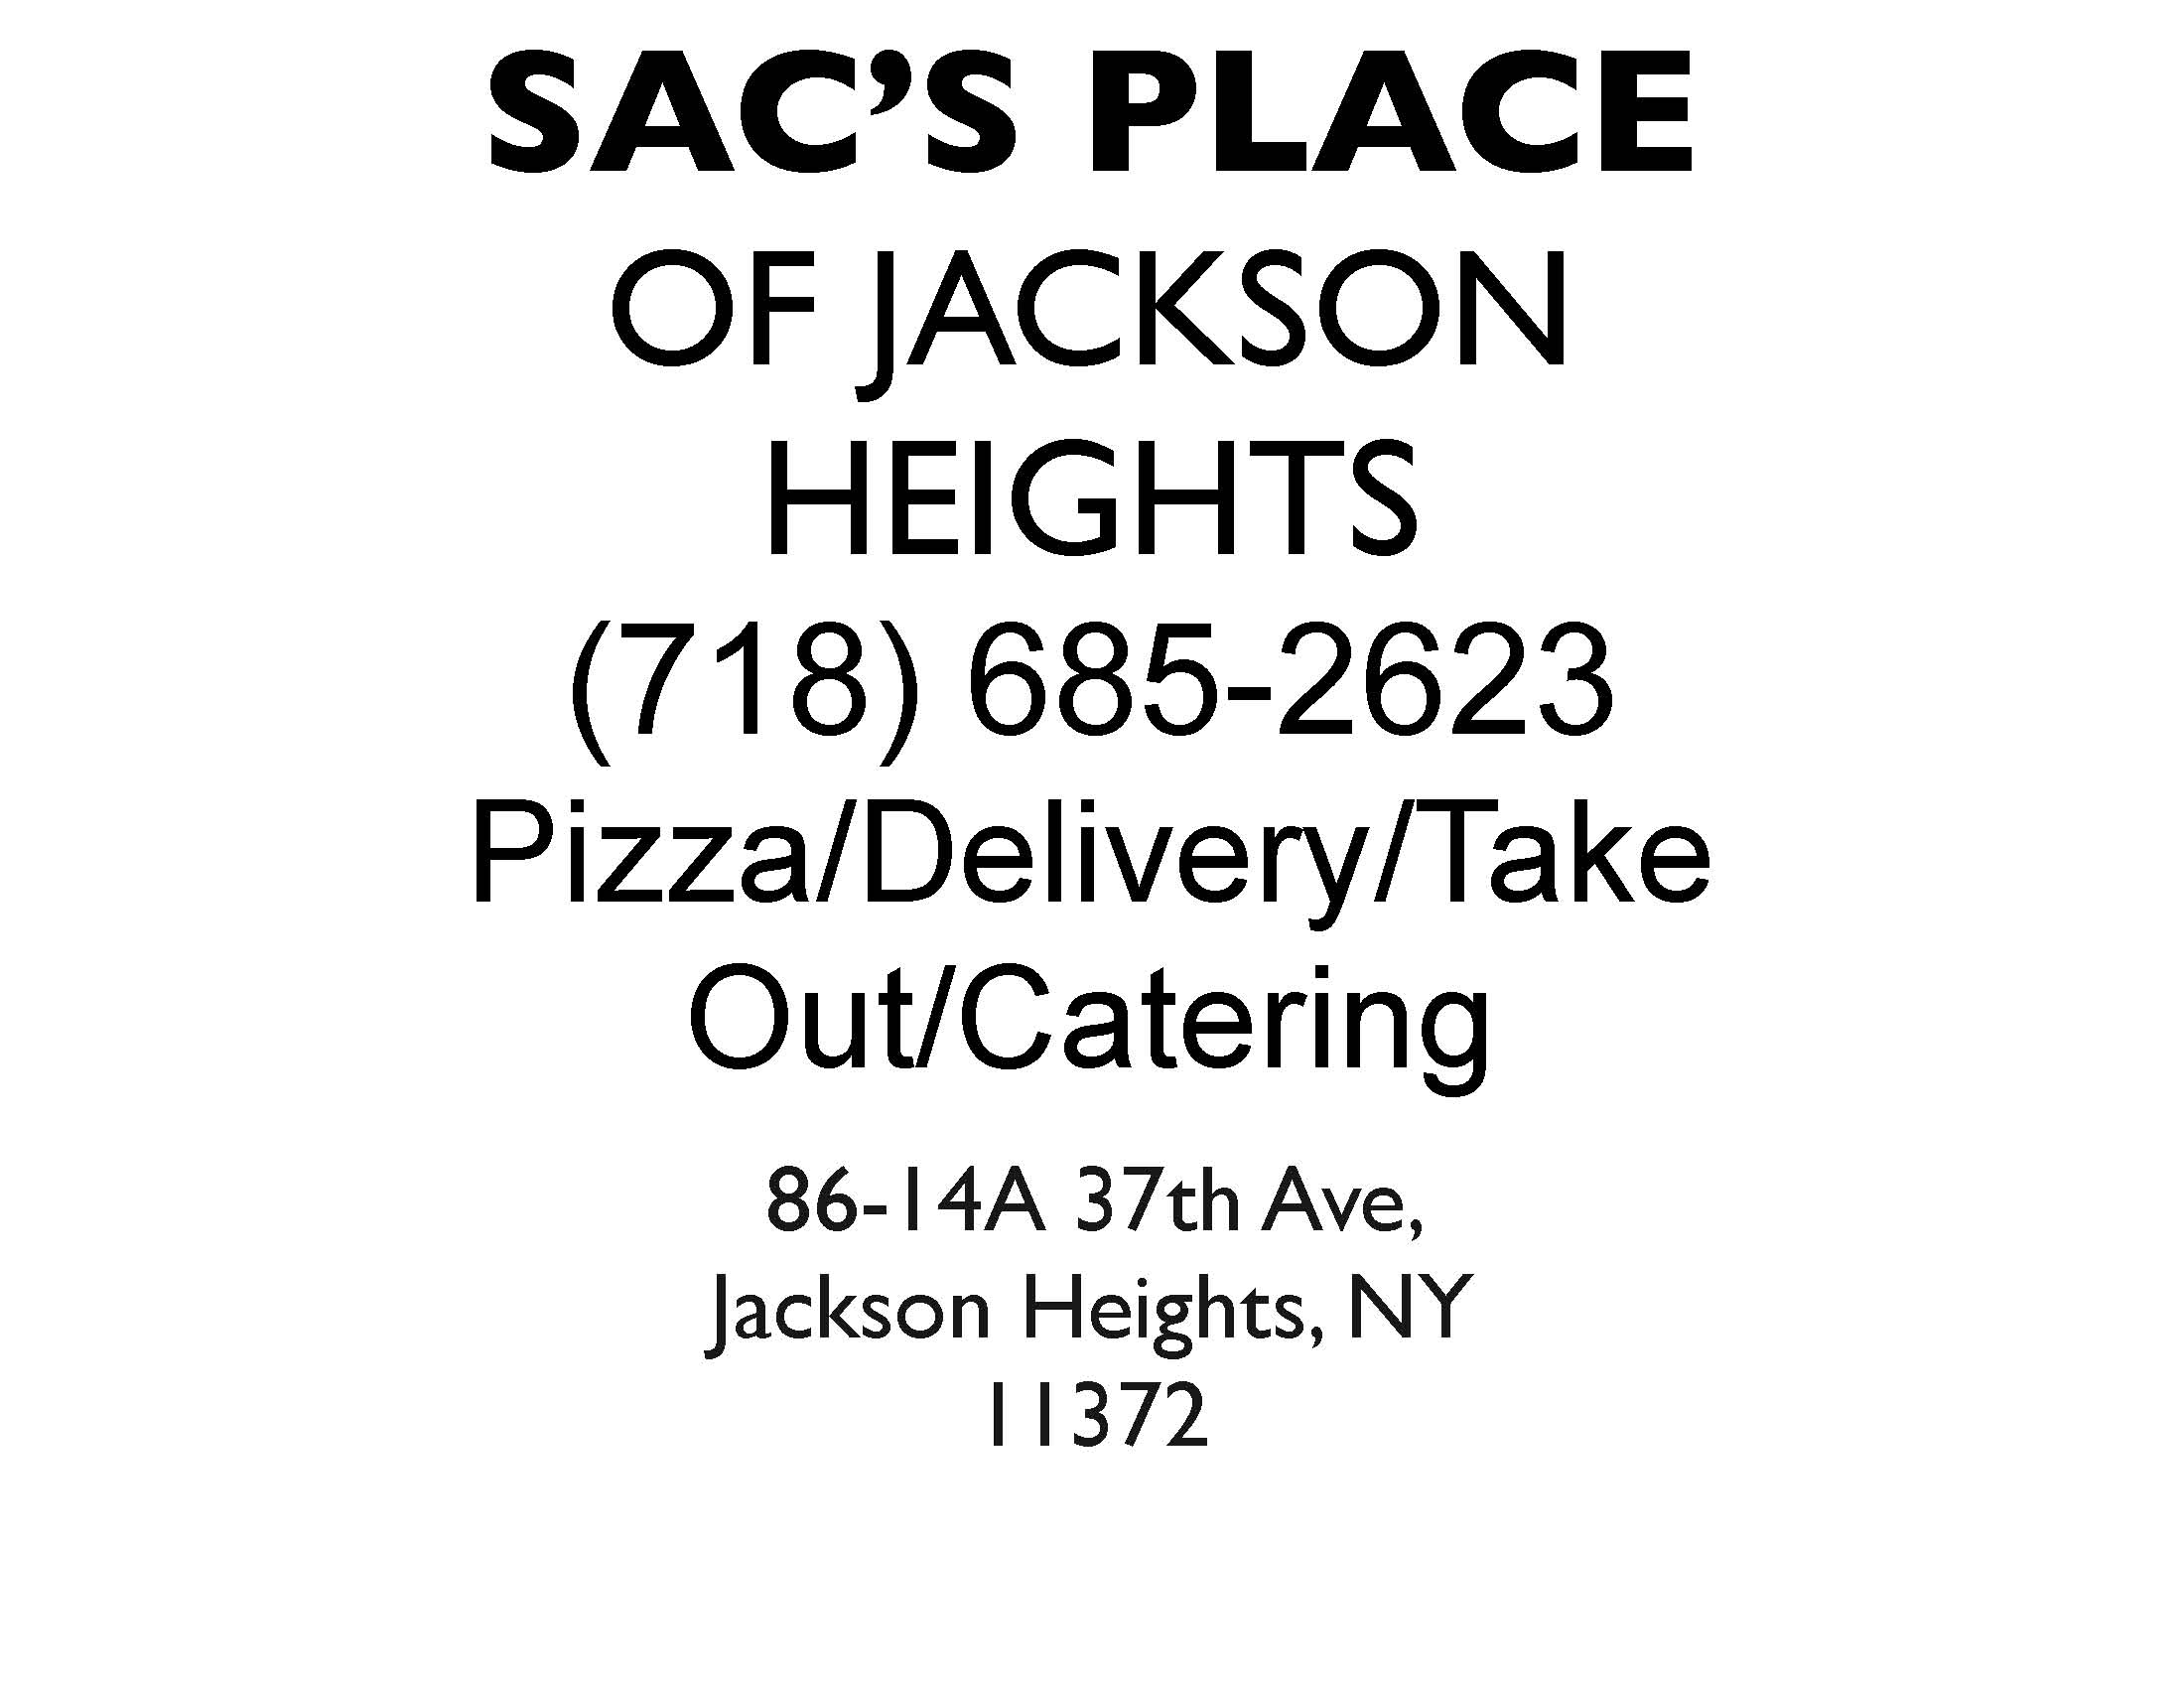 SAC'S PLACE OF JACKSON HEIGHTS